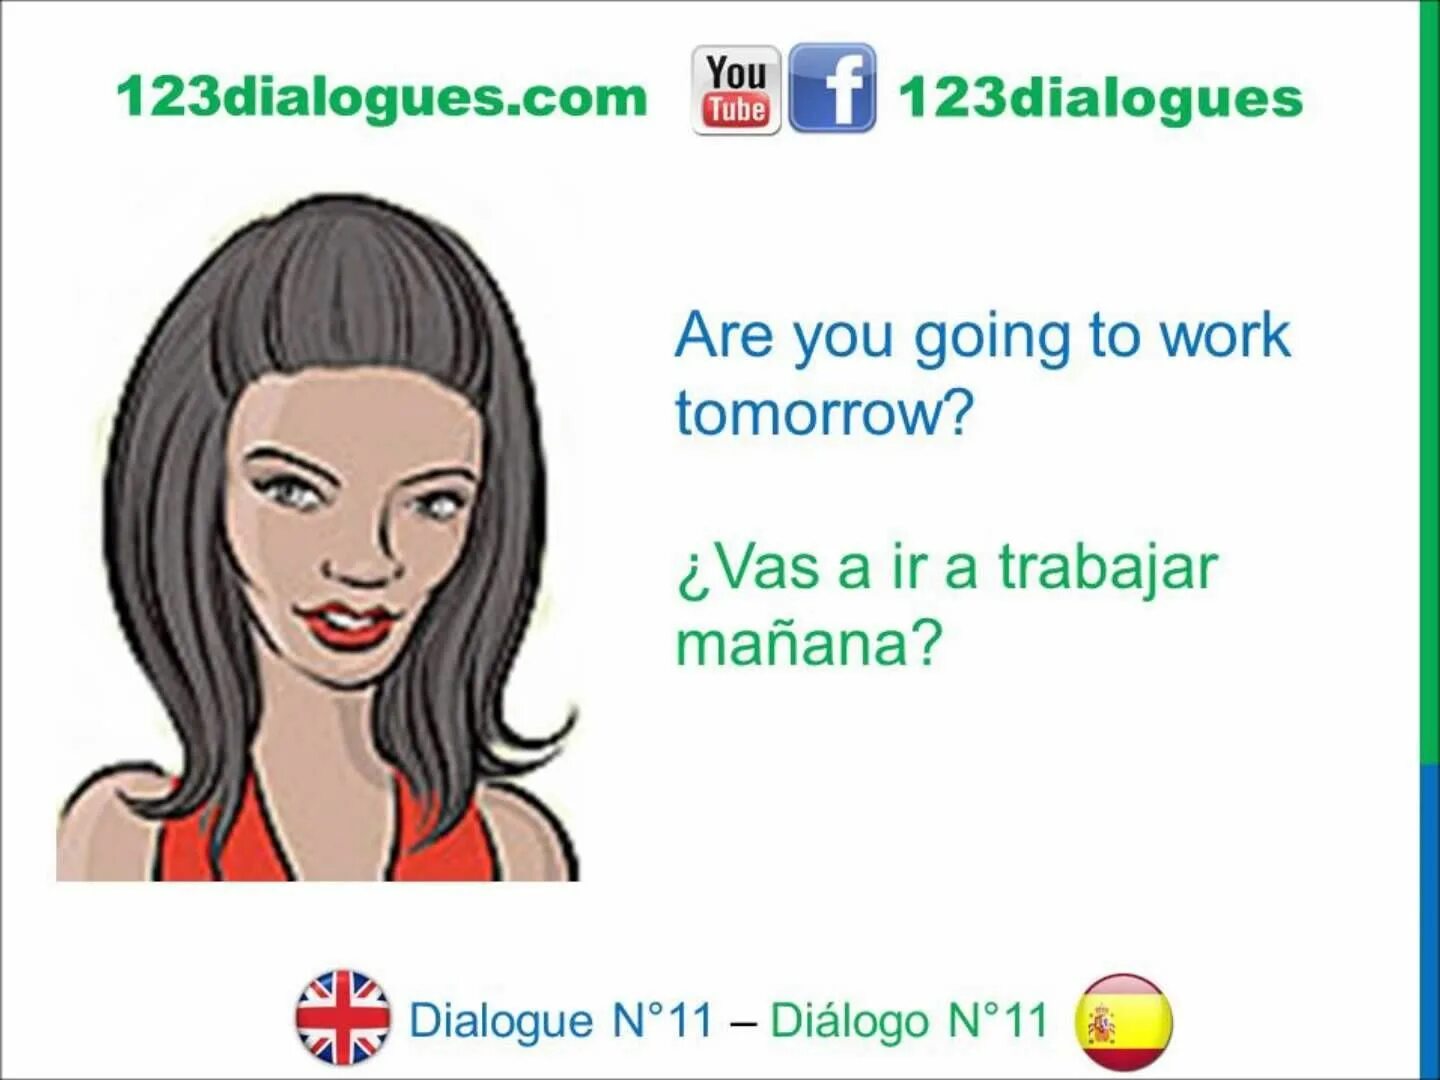 Dialogues. Au telephone Dialogue. Speak French. Going out dialogues